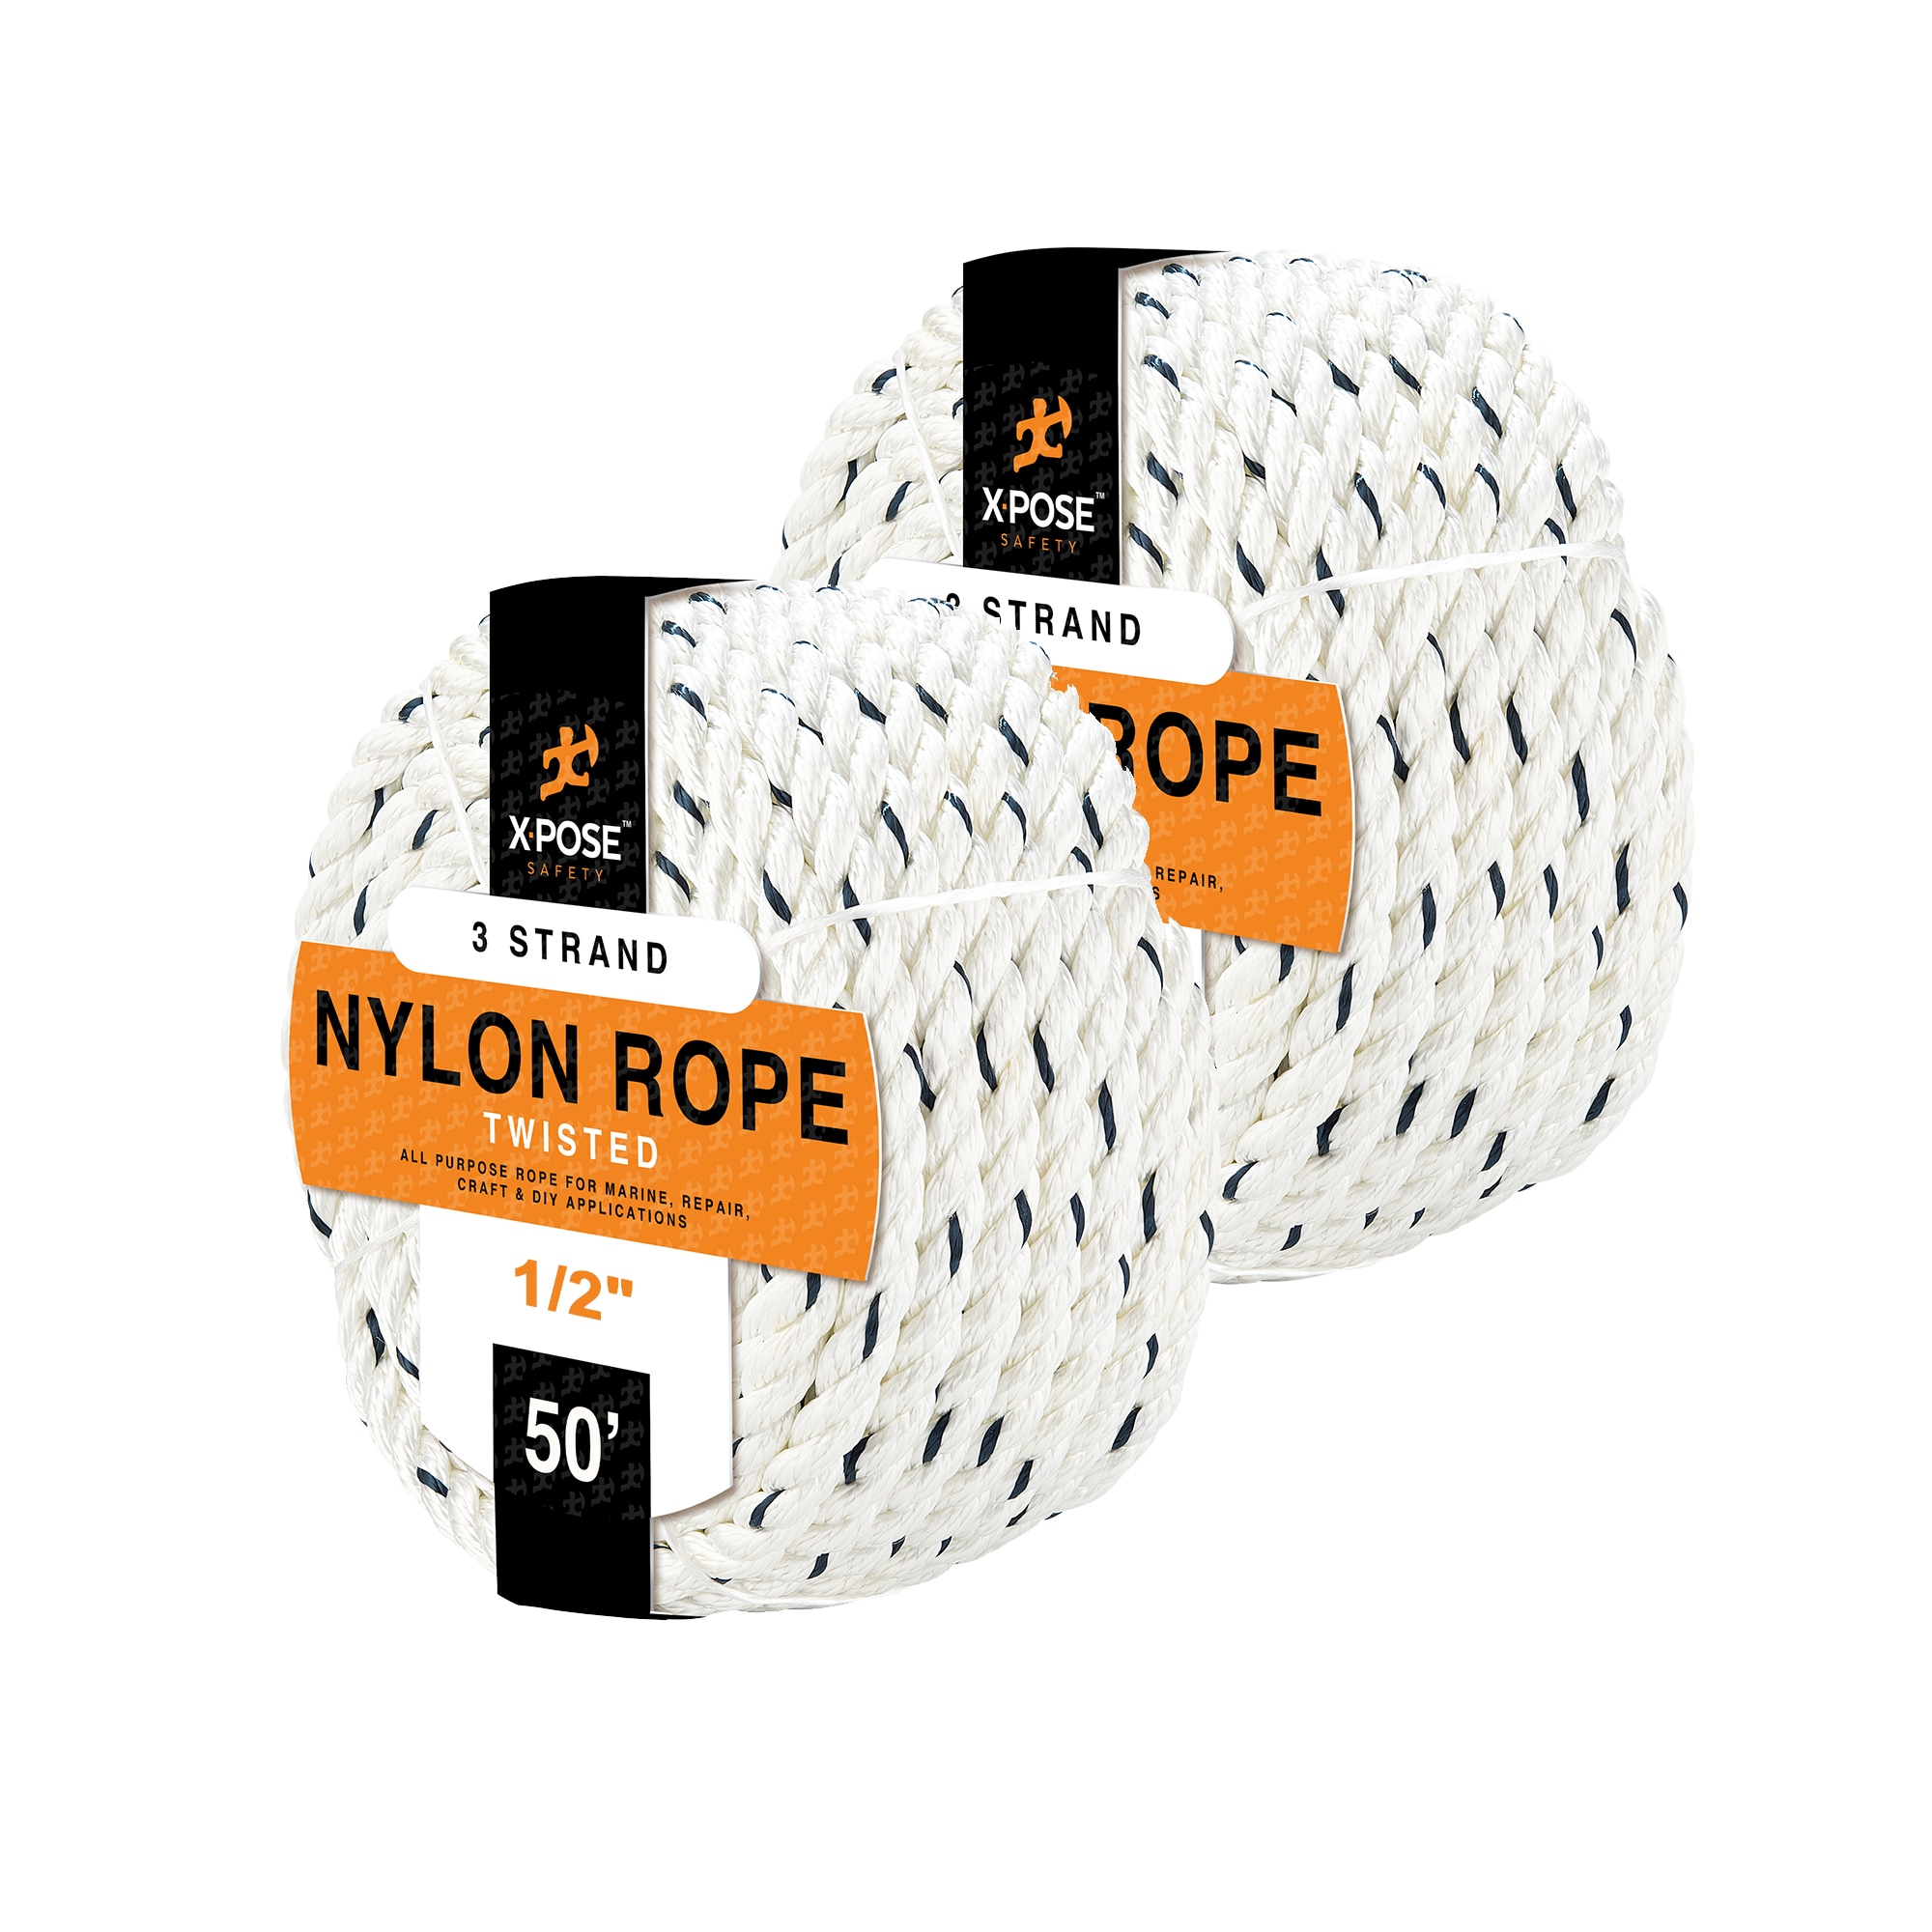 XPOSE SAFETY Nylon Poly Rope - 1/2 Inch Polyester and Nylon Rope 50 Ft - Up  to 10x Stronger Compared Natural Fiber or Polypropylene Rope - Synthetic 3  Strand Braided Rope 